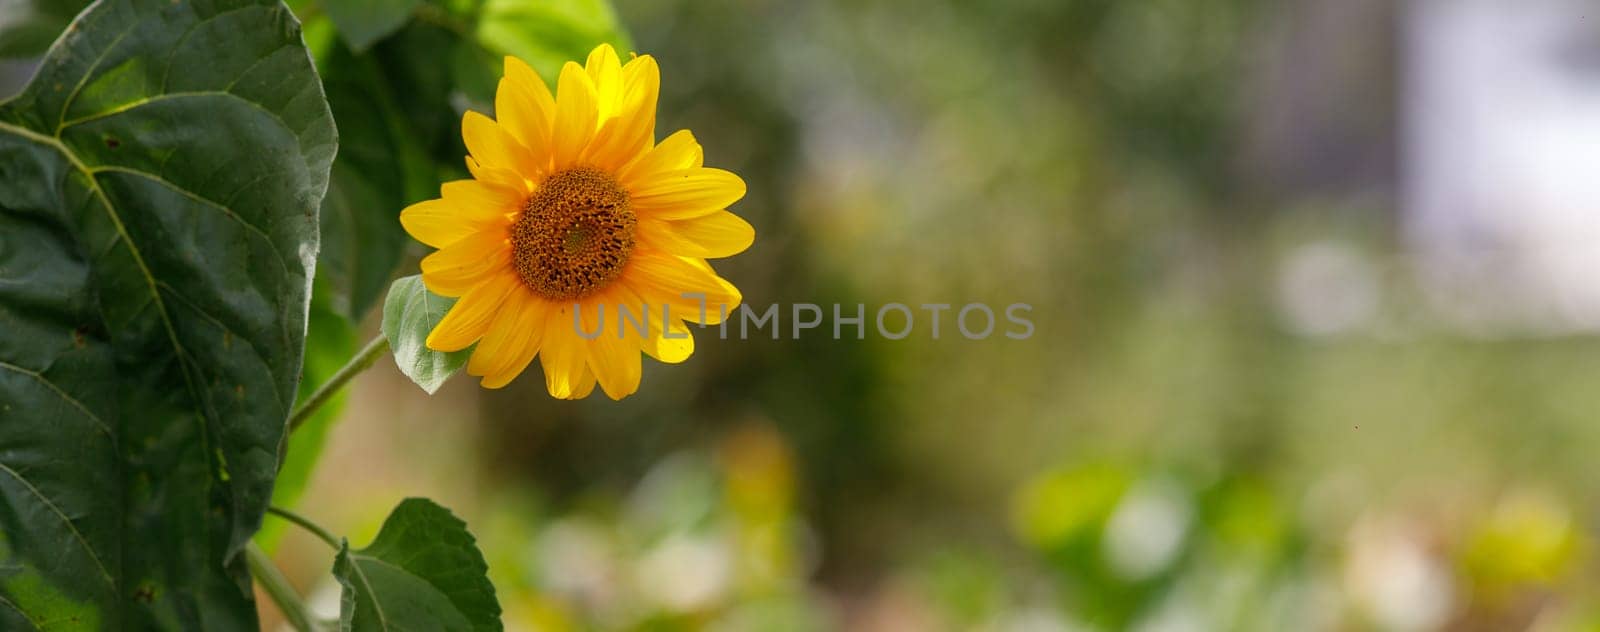 sunflower flower field and place for text. High quality photo